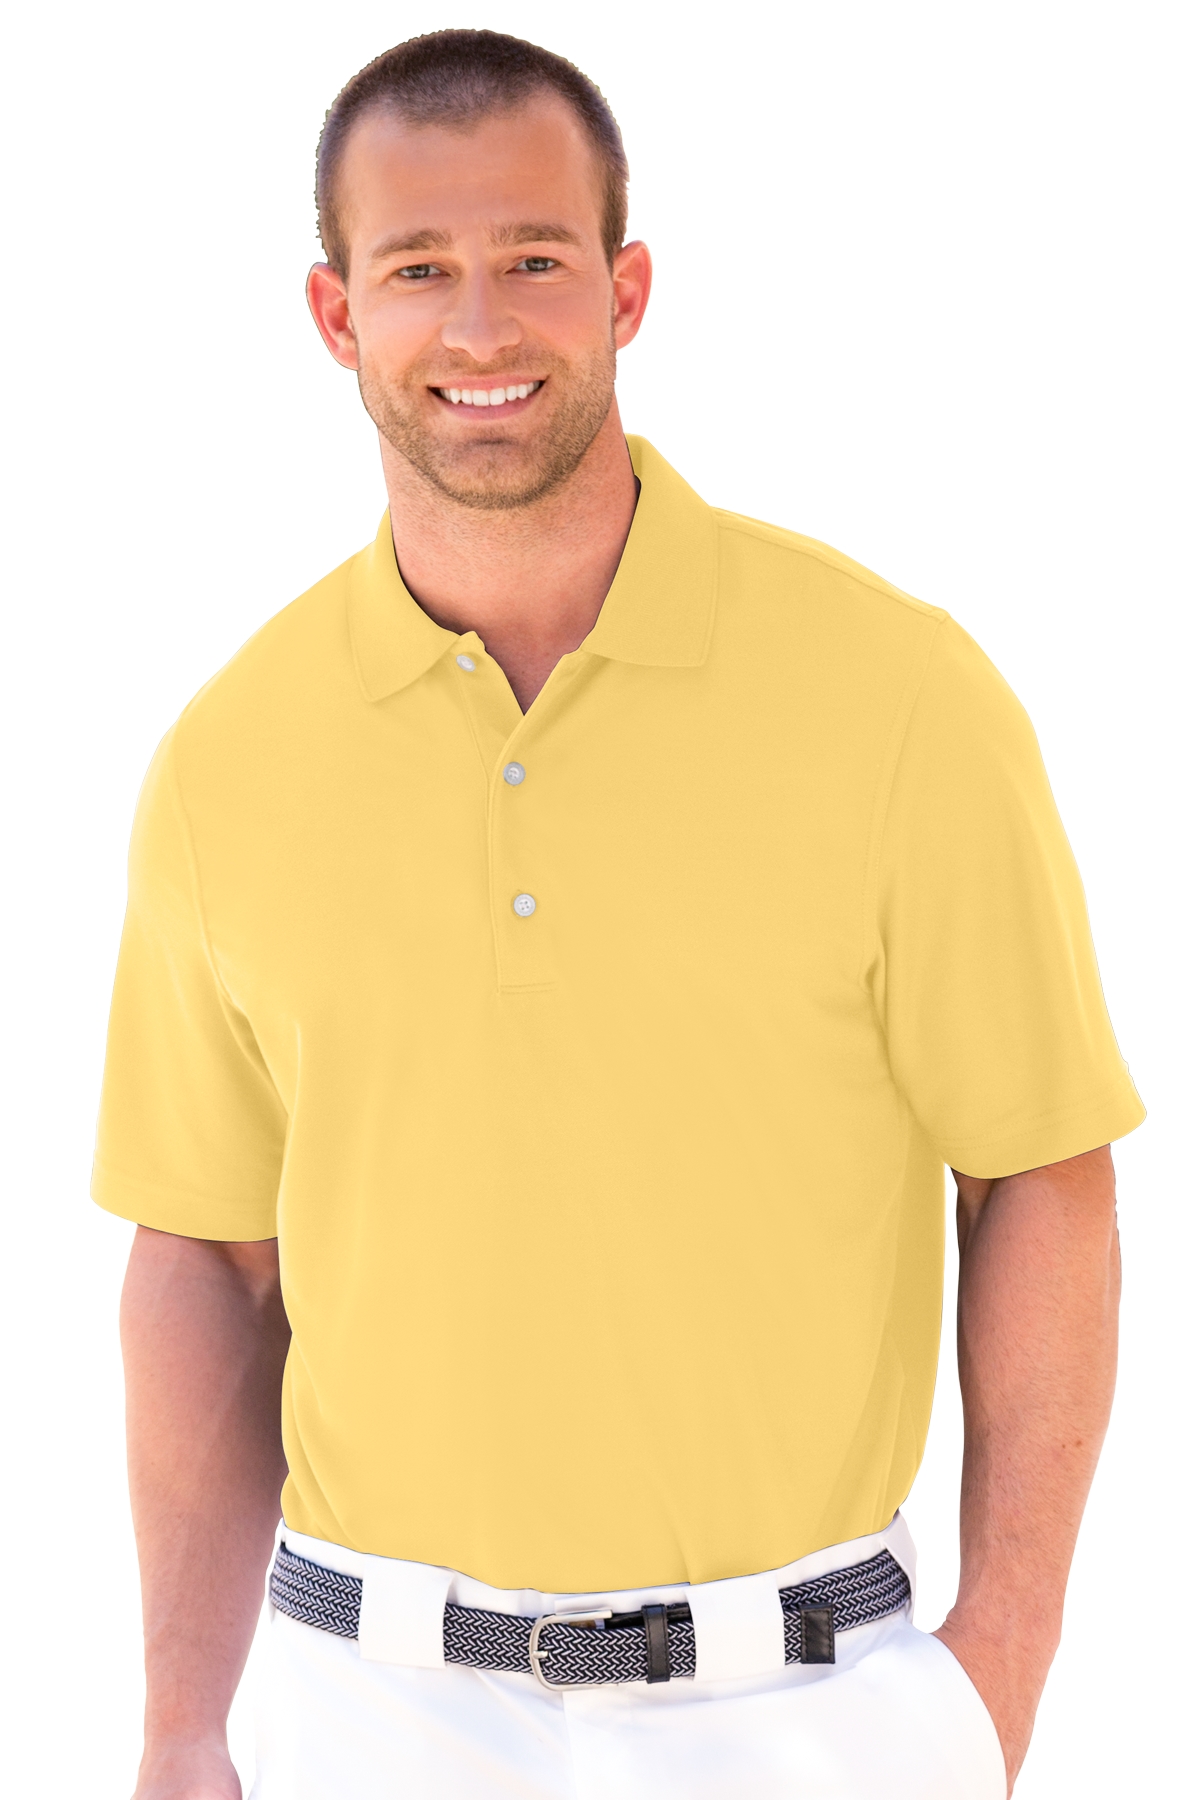 click to view Core Yellow